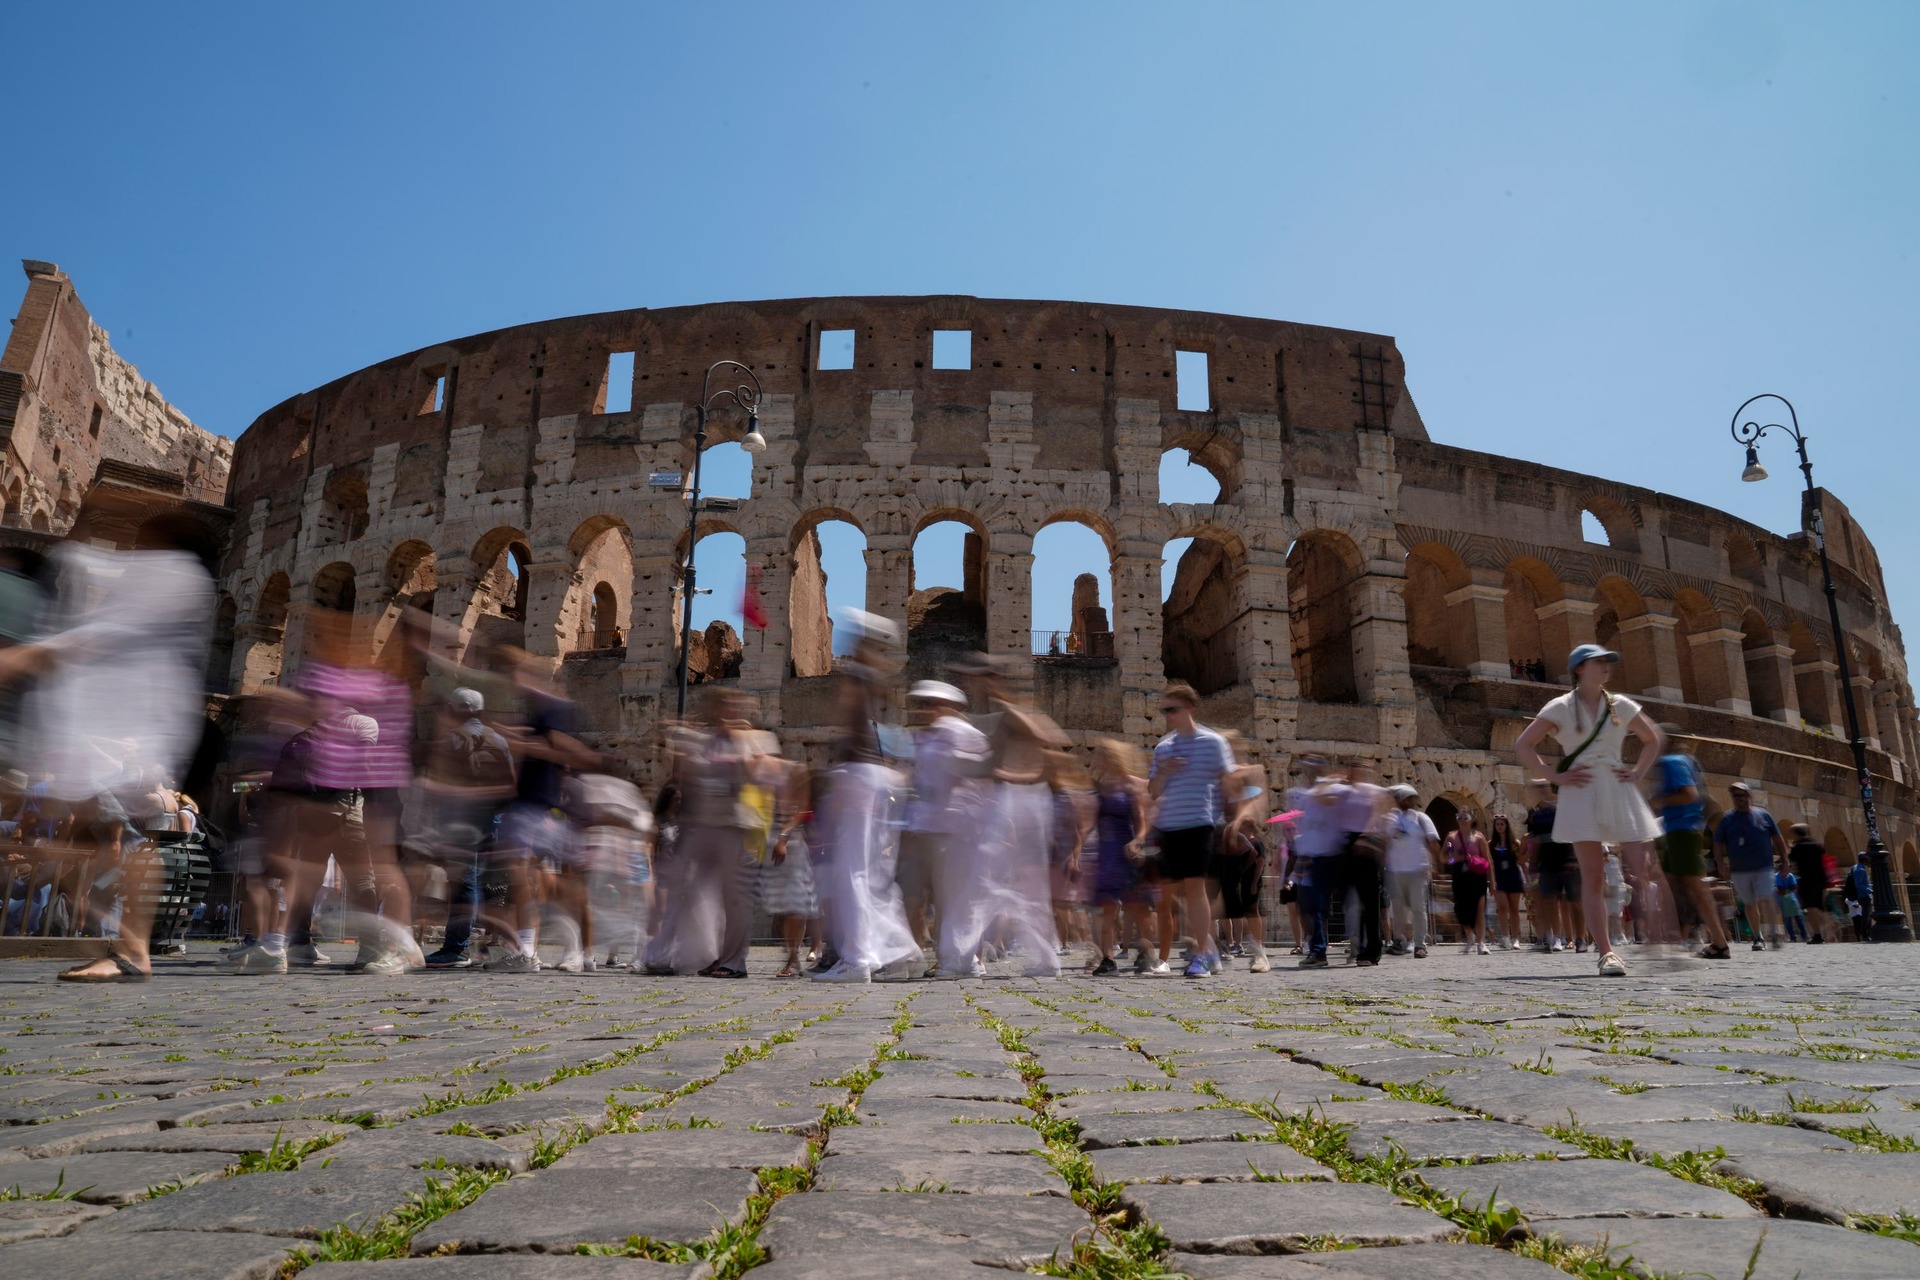 Visitors walk past the Colosseum in Rome where a visitor was spotted carving their name.